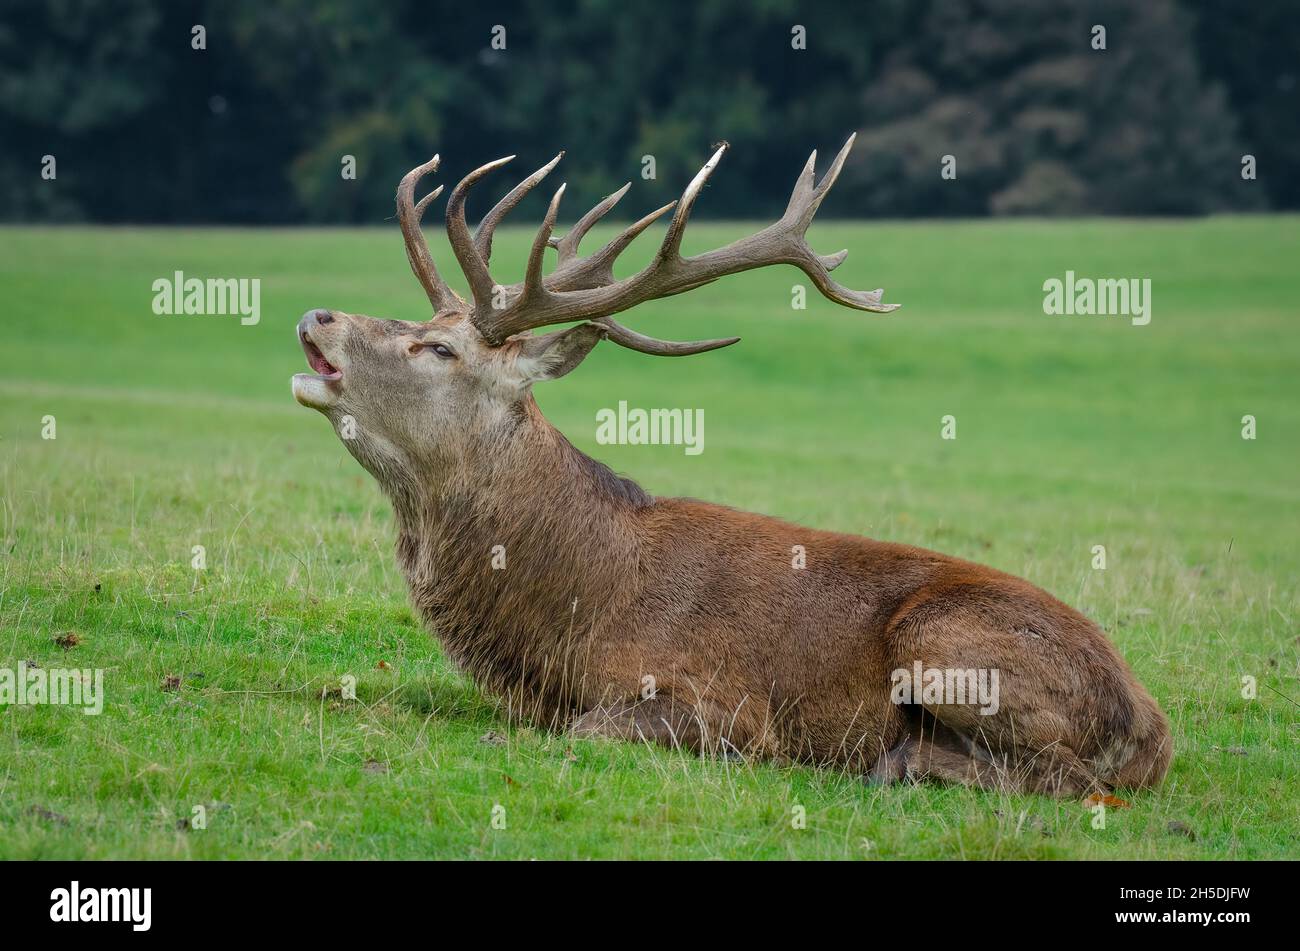 A red deer stag with large antlers lying on the grass bellowing Stock Photo